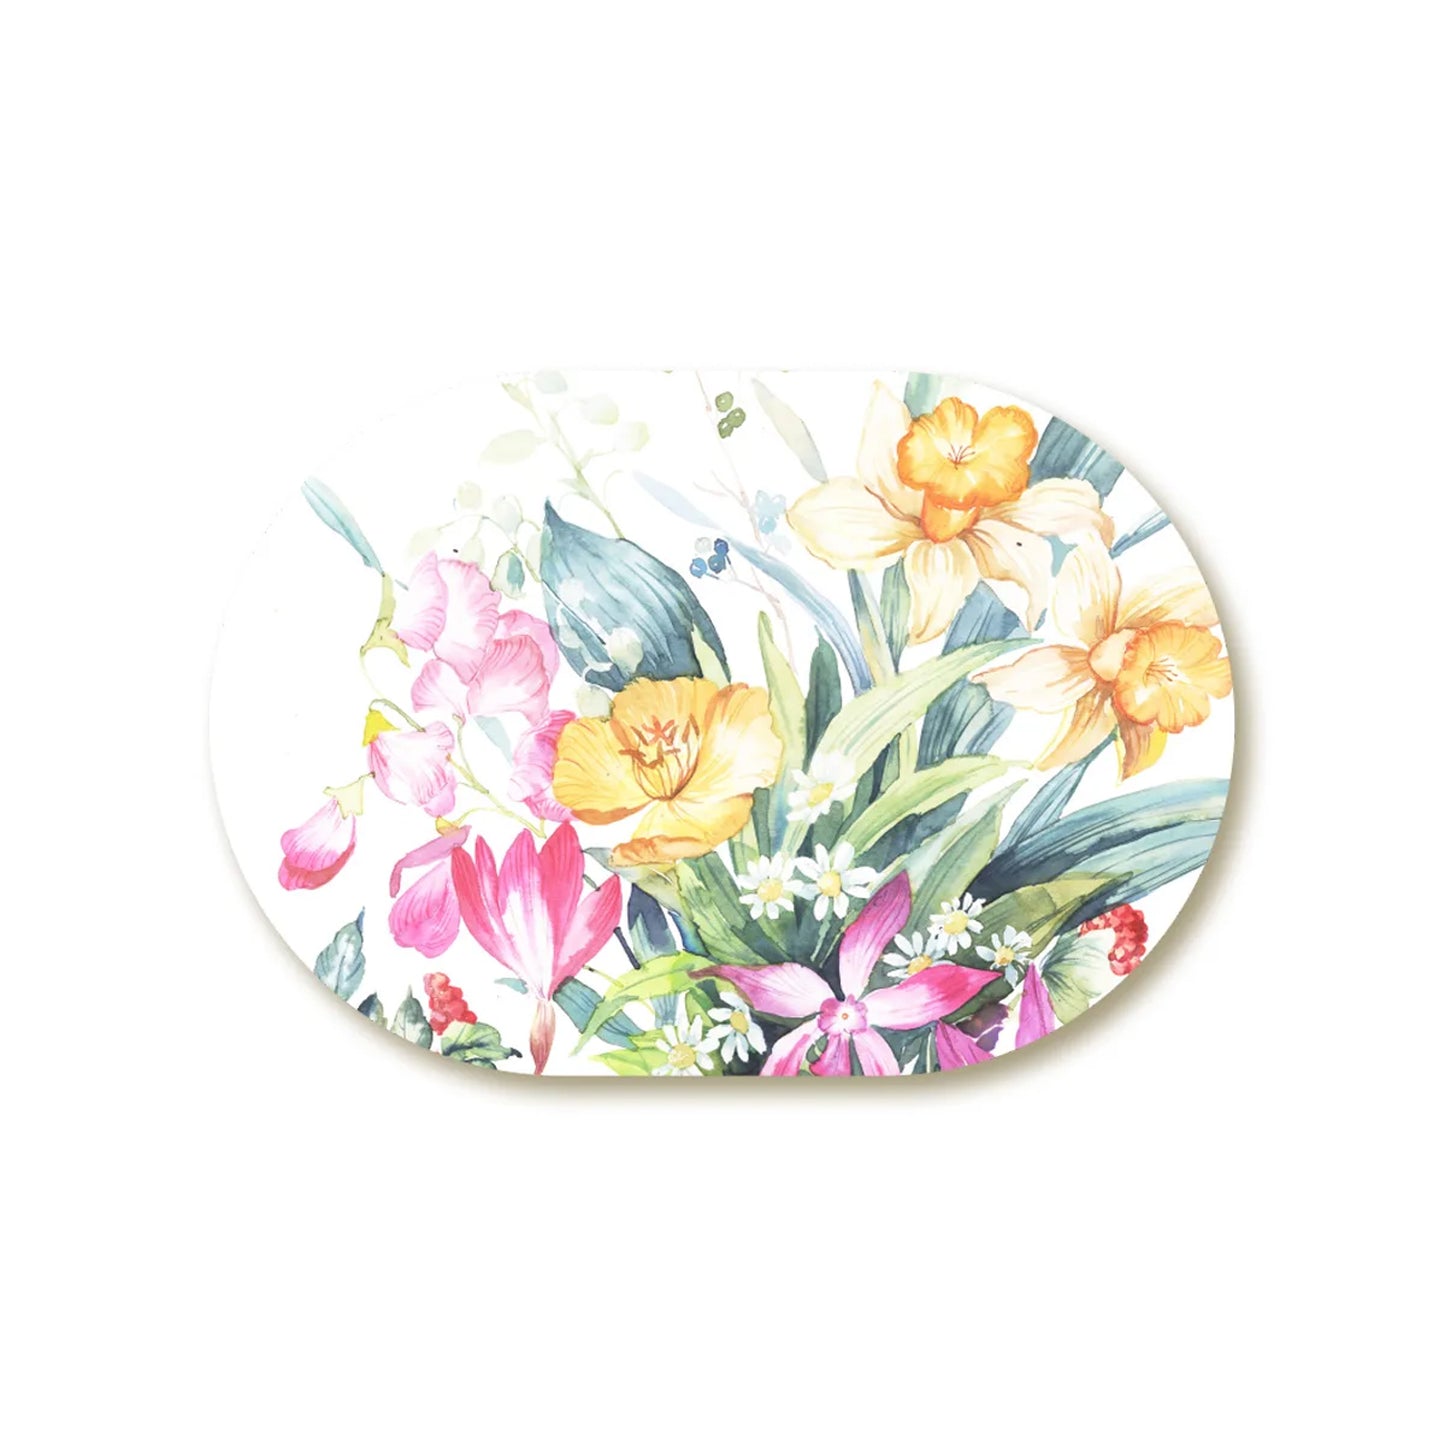 Floral Melody Tablemats | TM 095 (set of 2)